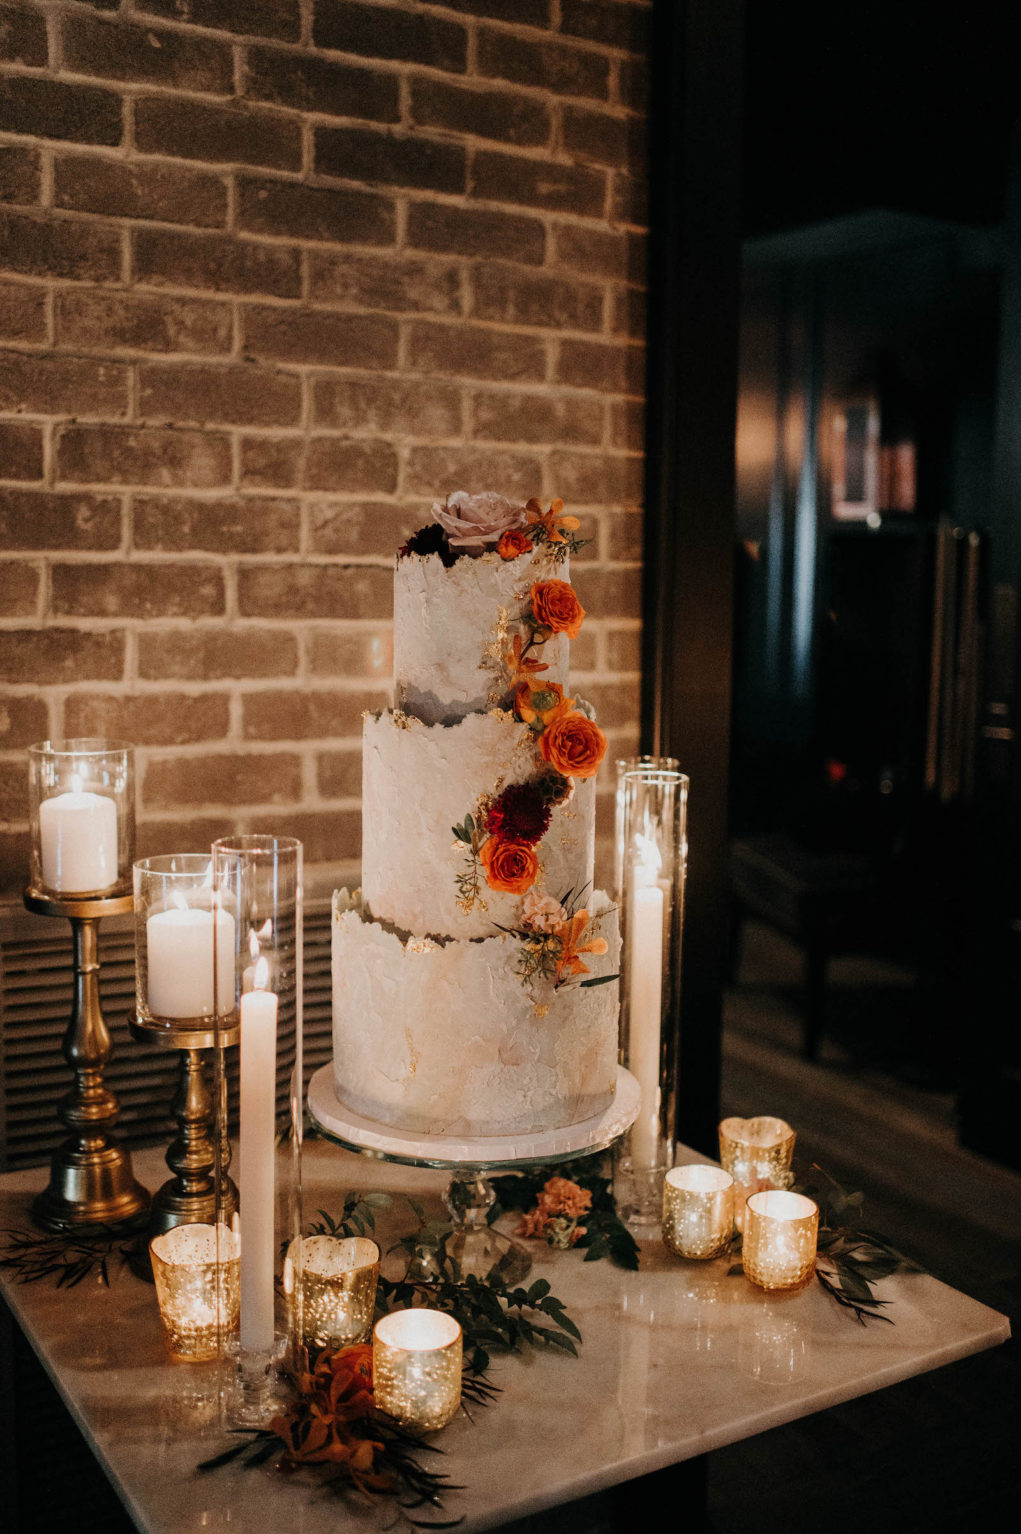 Three Tier White and Gold Textured Wedding Cake with Burnt Orange Roses, Candlesticks and Mercury Gold Votives | Wedding Venue Urban Stillhouse St. Pete | Tampa Bay Wedding Cake The Artistic Whisk